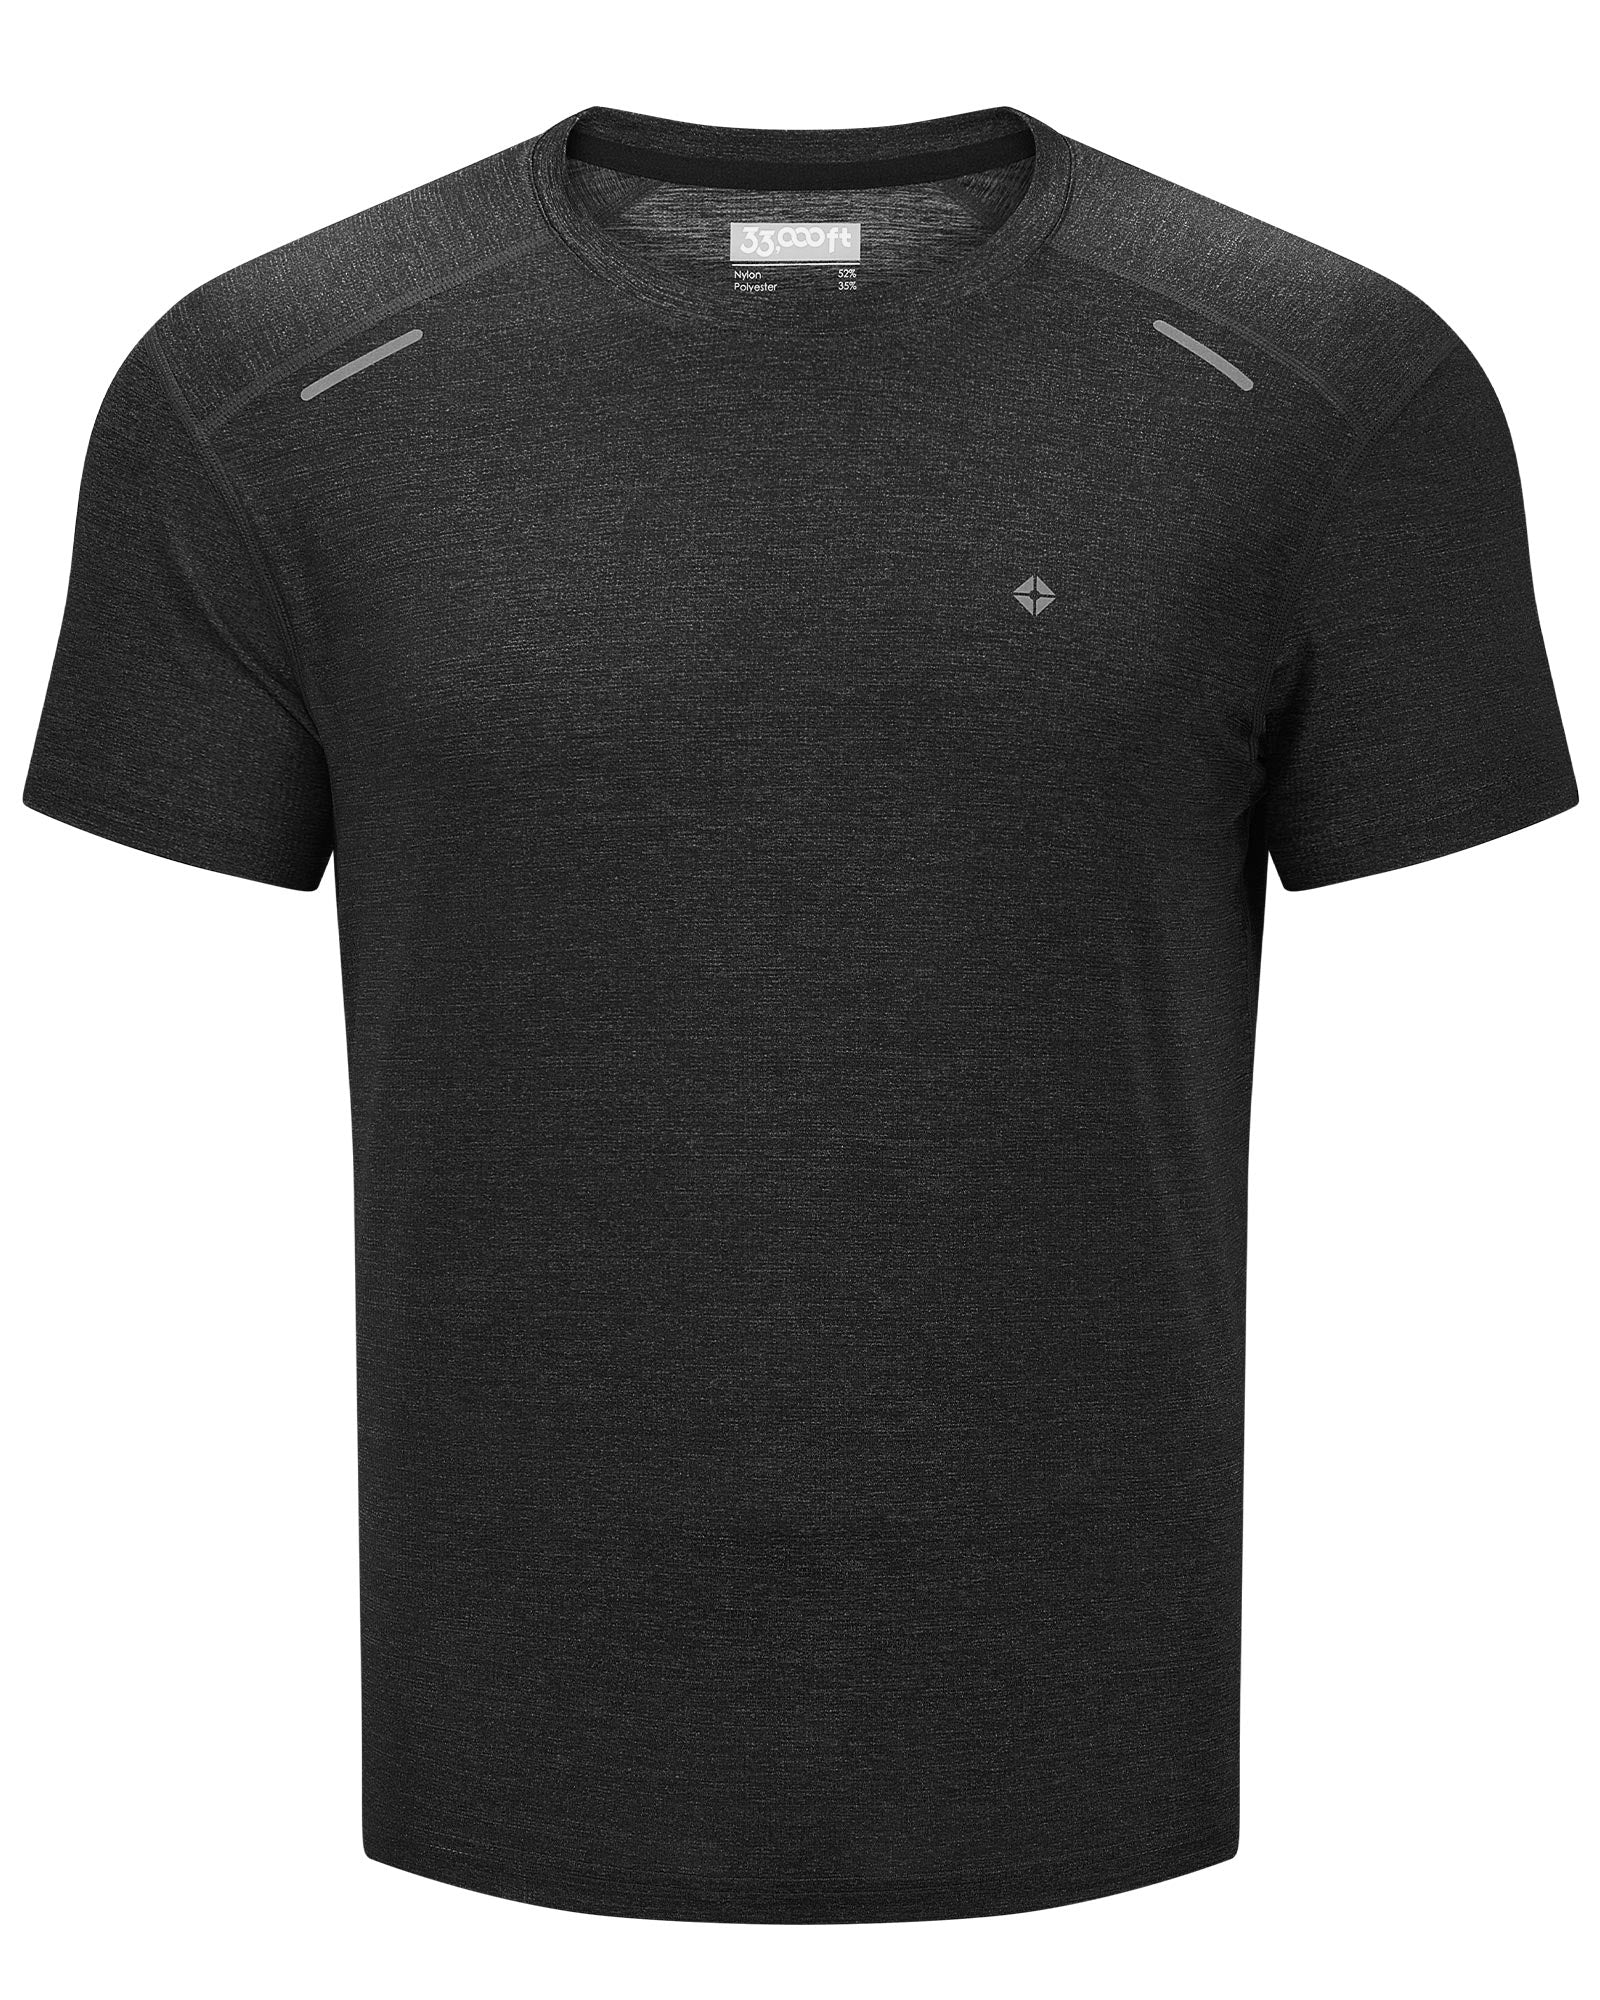 Men's Dry Fit Moisture Wicking Performance Short Sleeve Active Athleti –  33,000ft